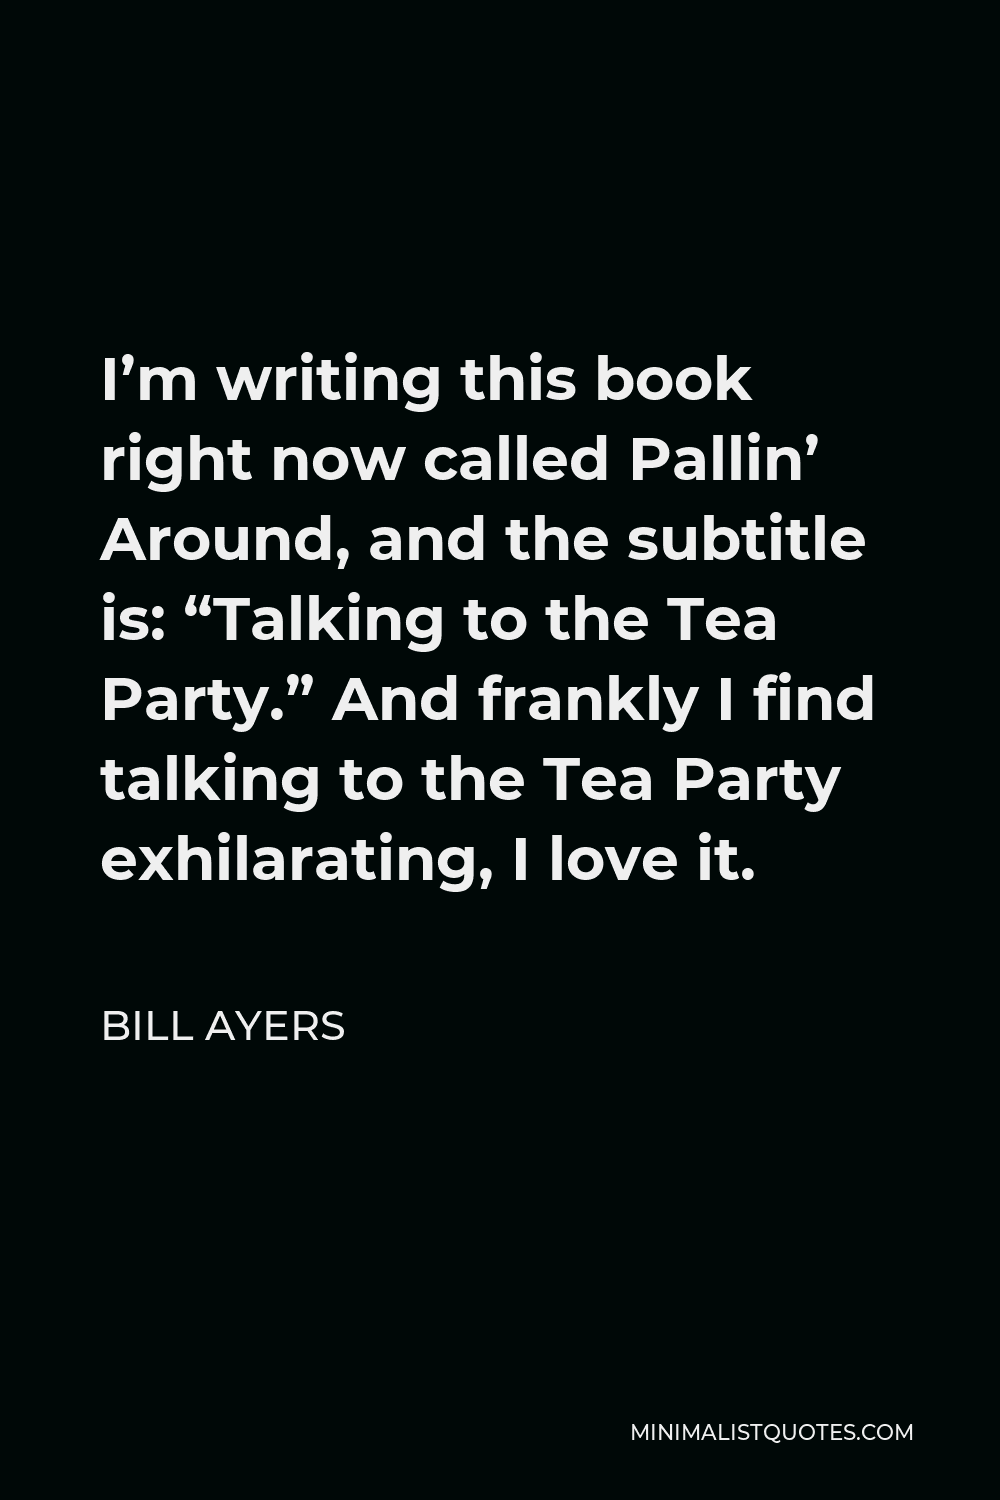 Bill Ayers Quote - I’m writing this book right now called Pallin’ Around, and the subtitle is: “Talking to the Tea Party.” And frankly I find talking to the Tea Party exhilarating, I love it.